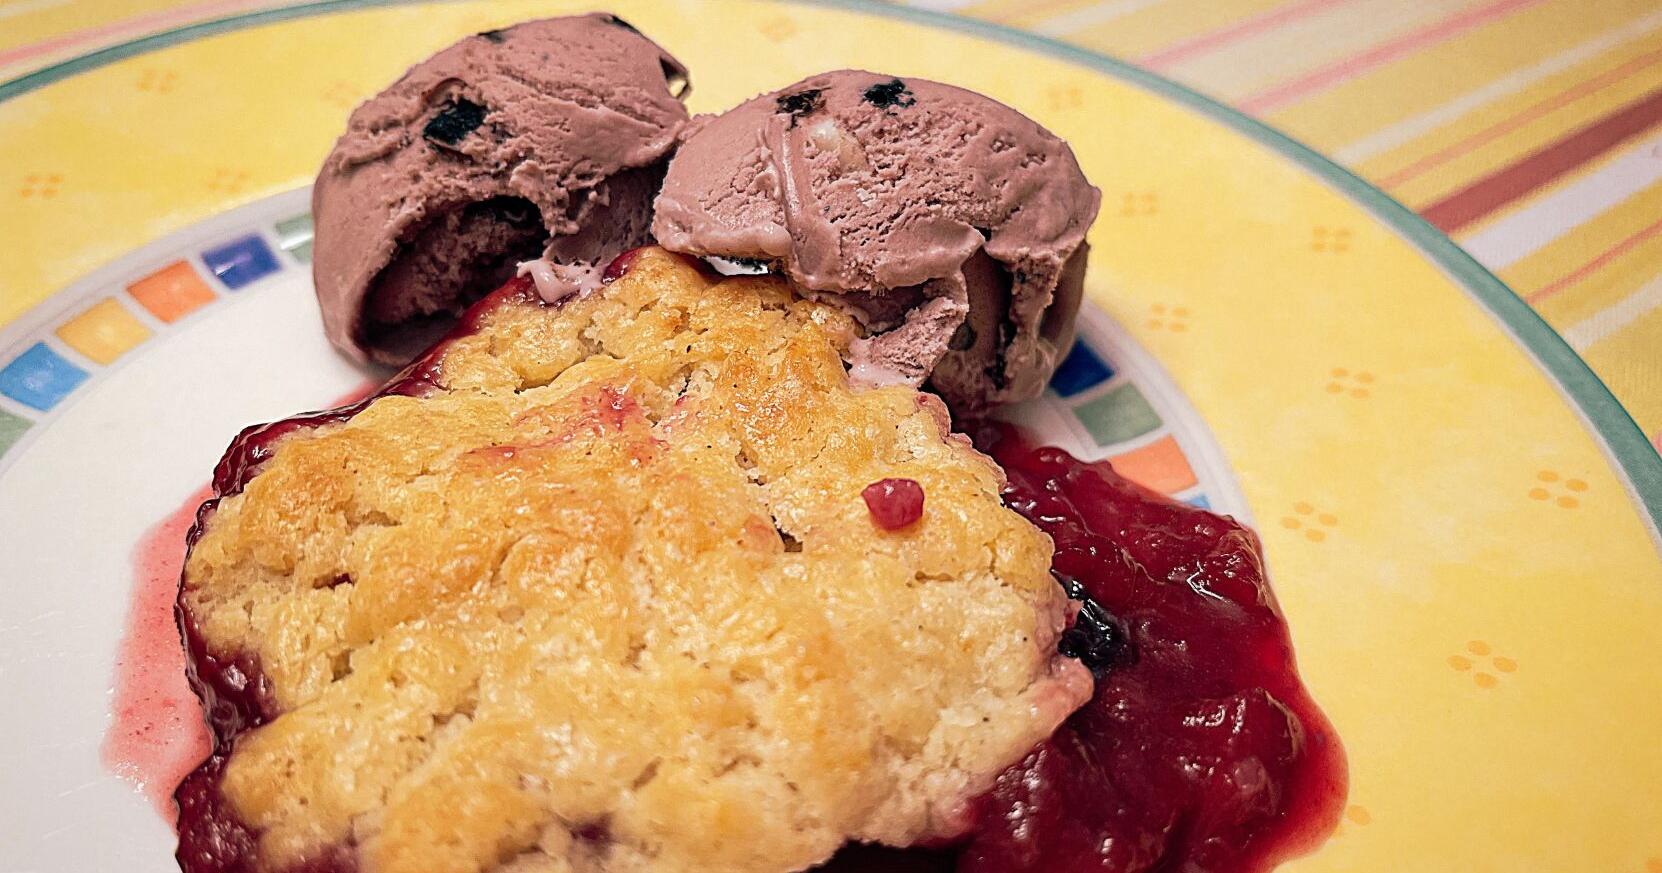 Out of strawberries? You can mix any type of berry with rhubarb to make a delicious cobbler.